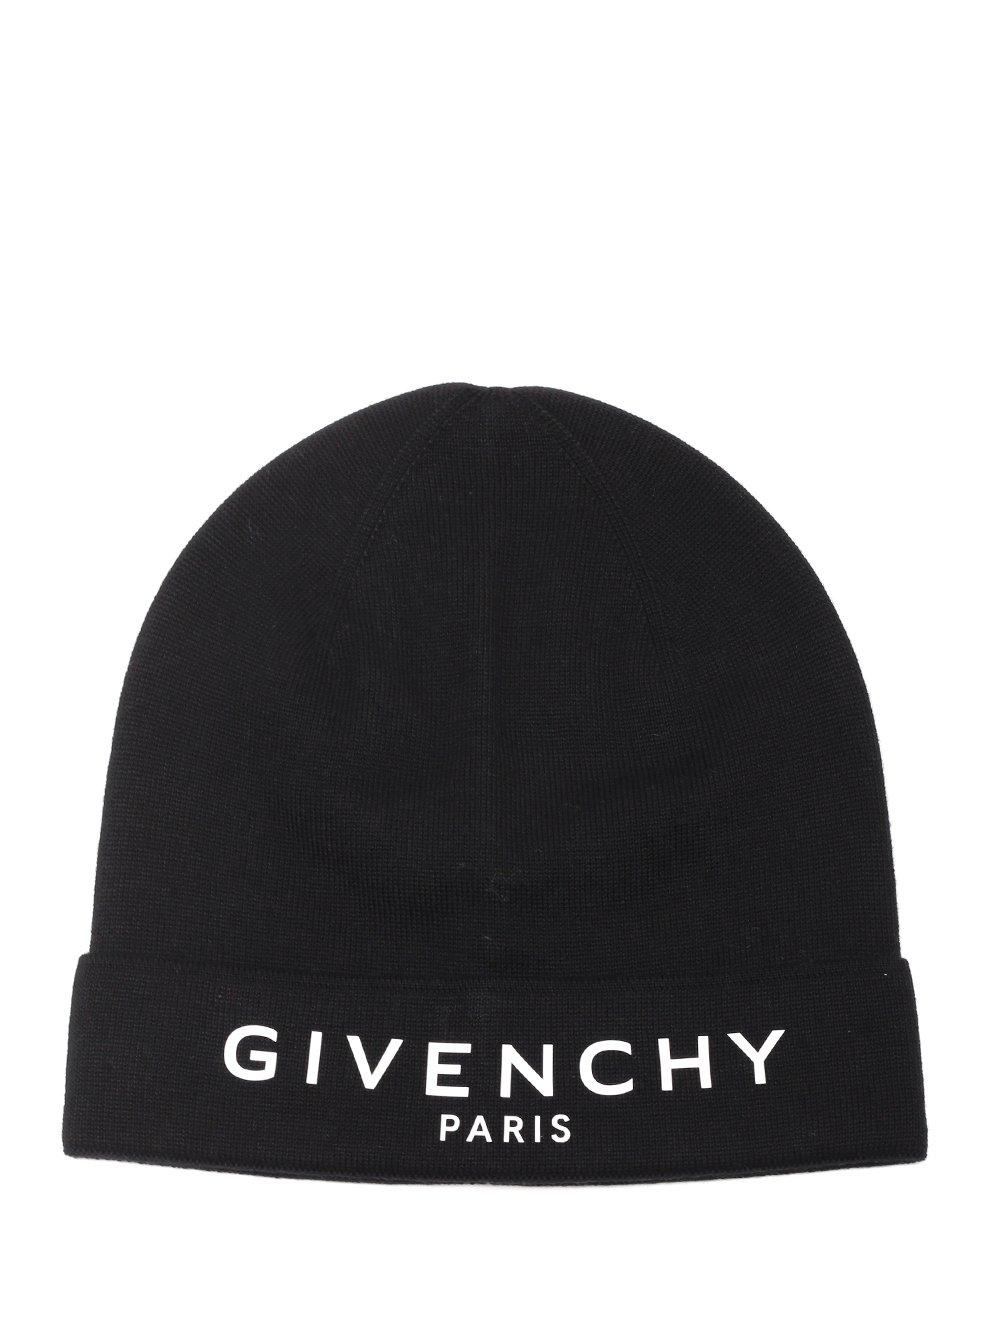 Givenchy Cotton Logo Embroidered Beanie in Black for Men - Lyst